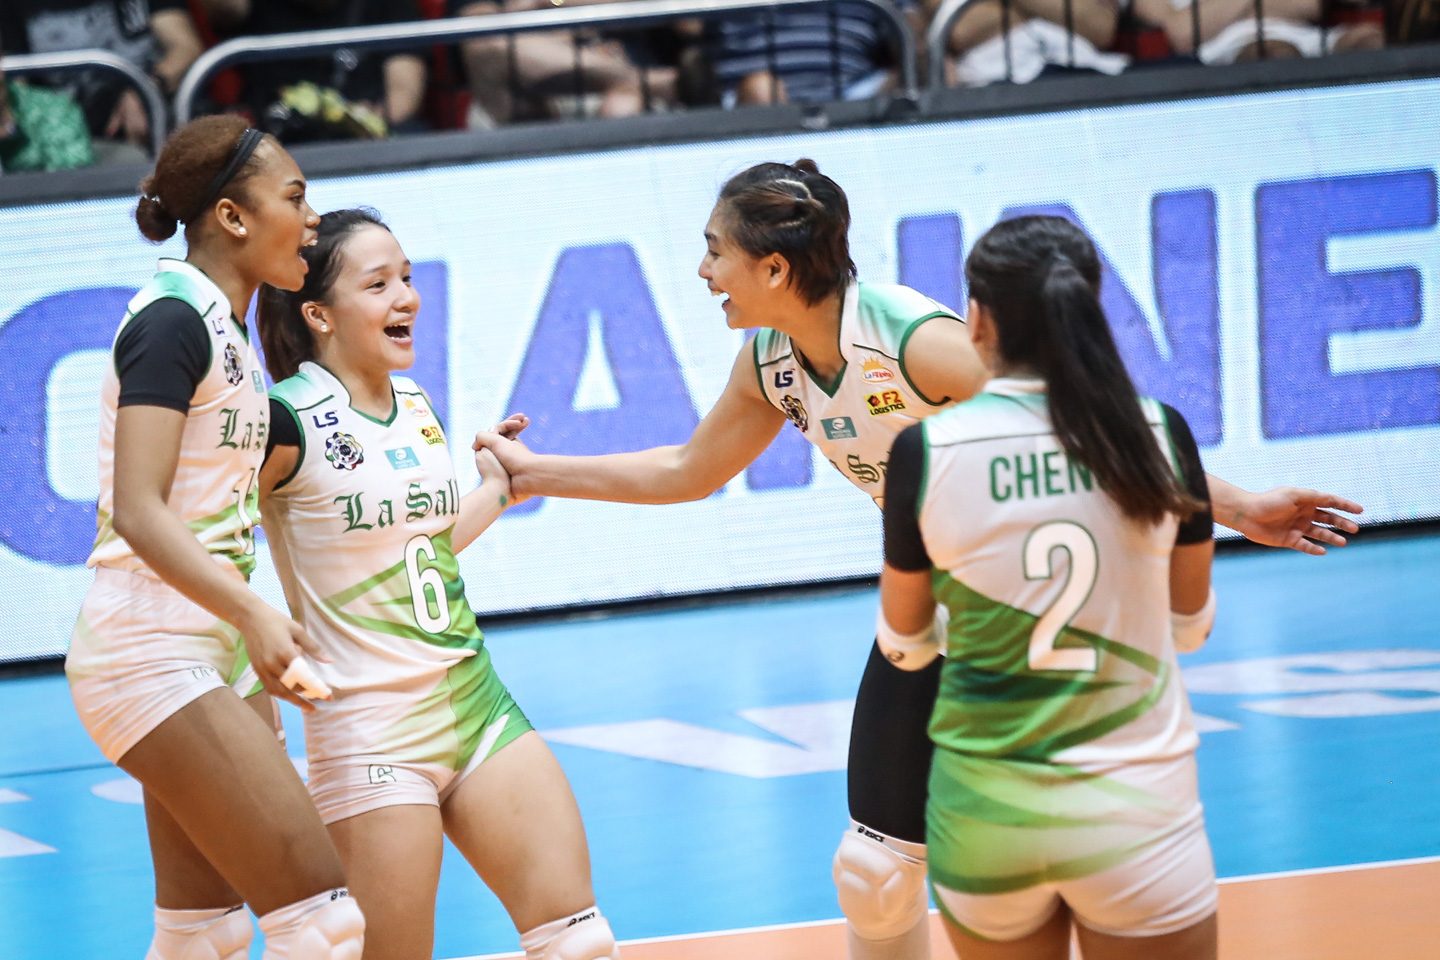 La Salle vies to stay solo on top as Adamson, UE dispute 1st win